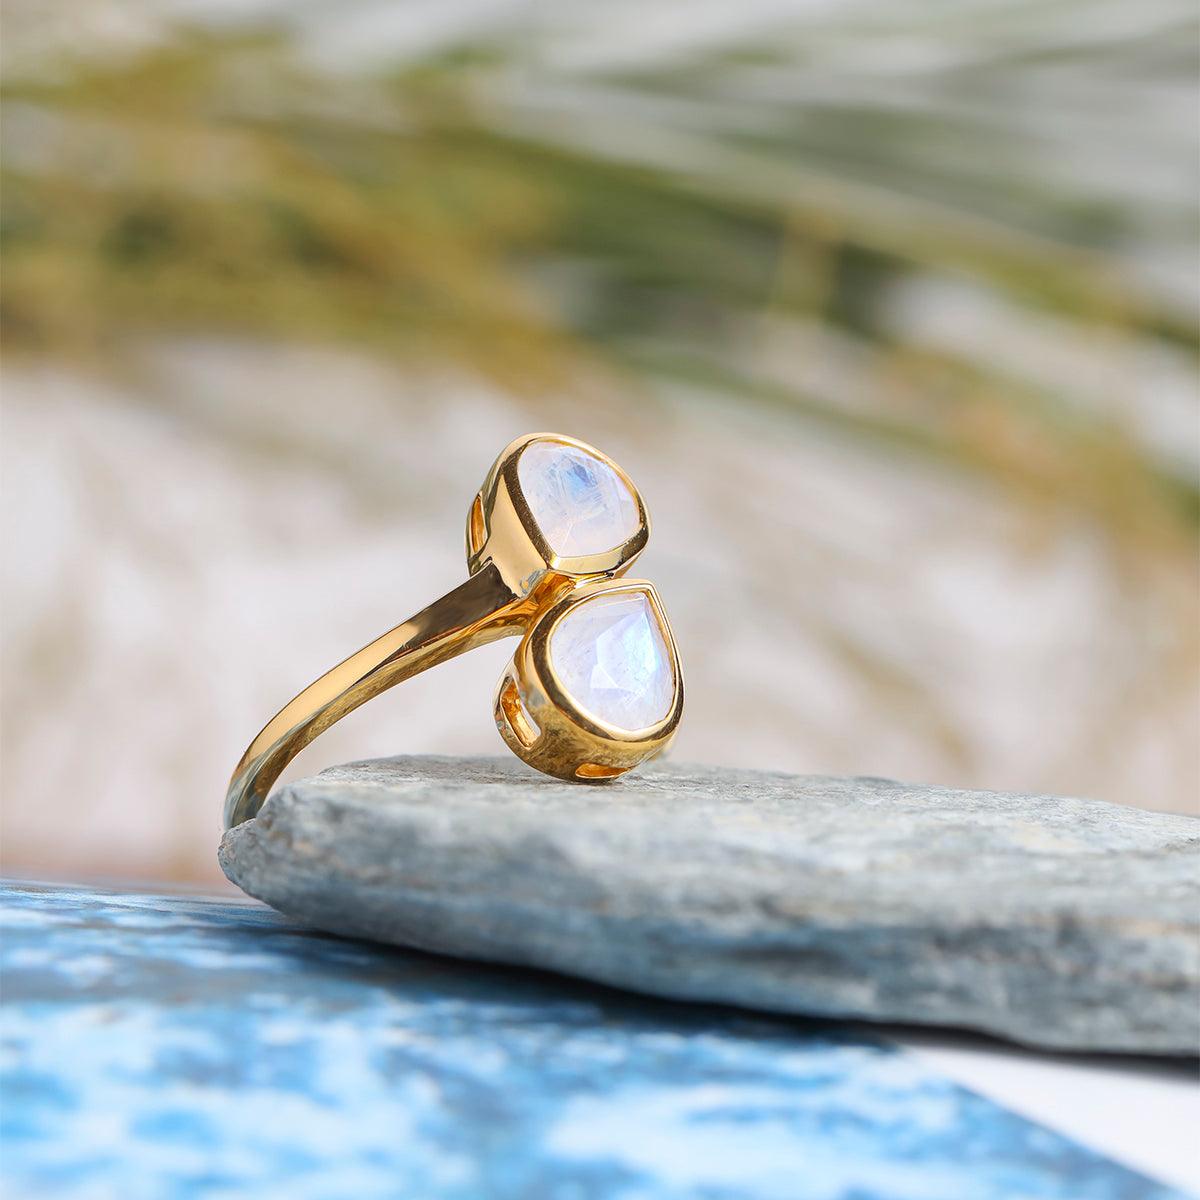 1.70 Ct. Moonstone Ring 14K Gold Over 925 Silver Jewelry - YoTreasure